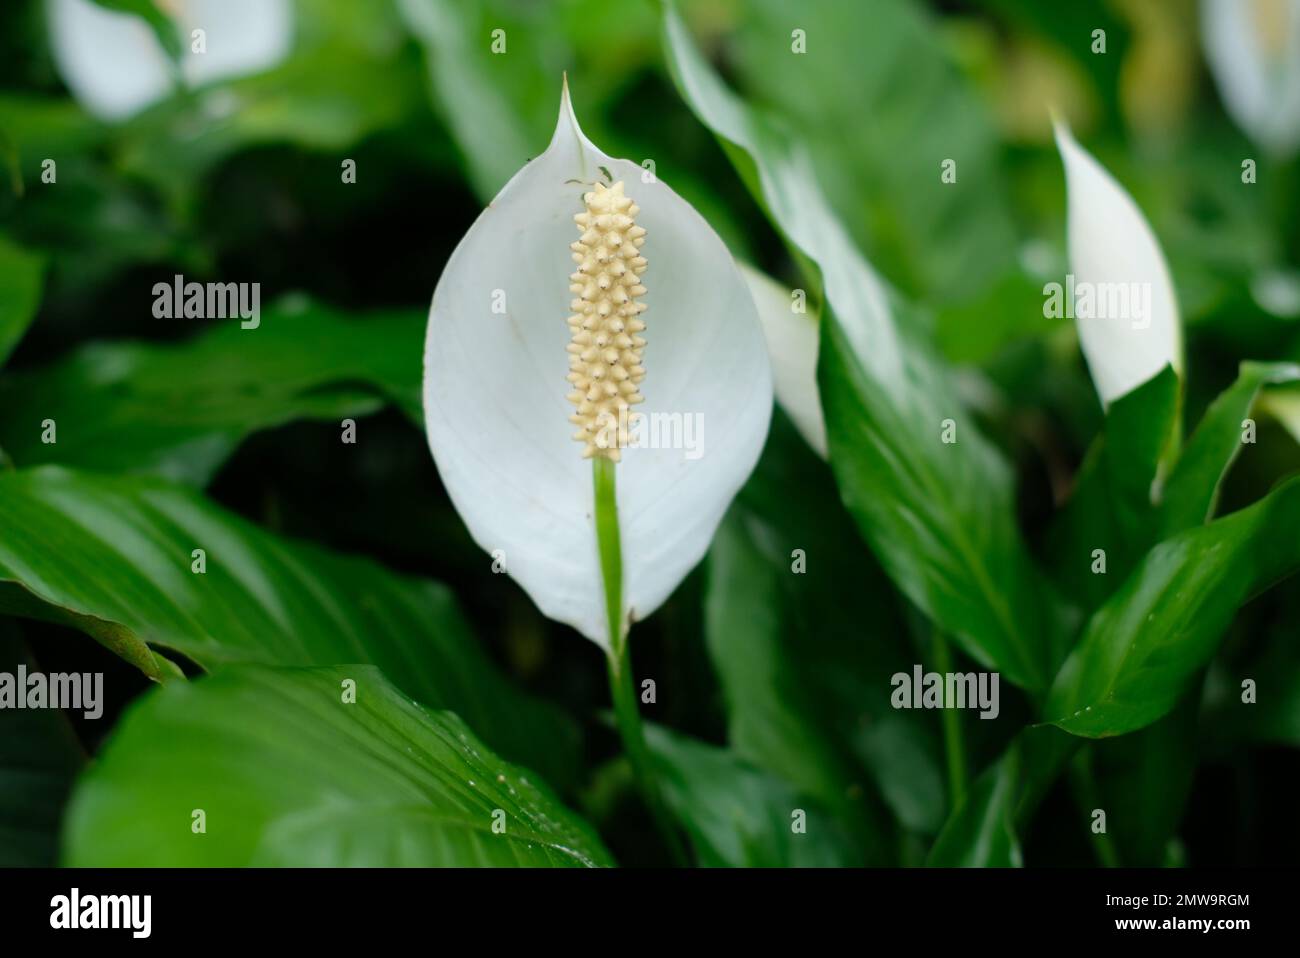 Flower white anturium and leaves. Spathiphyllum cochlearispathum is a plant species in the family Araceae. White spathiphyllum with green leaves Stock Photo